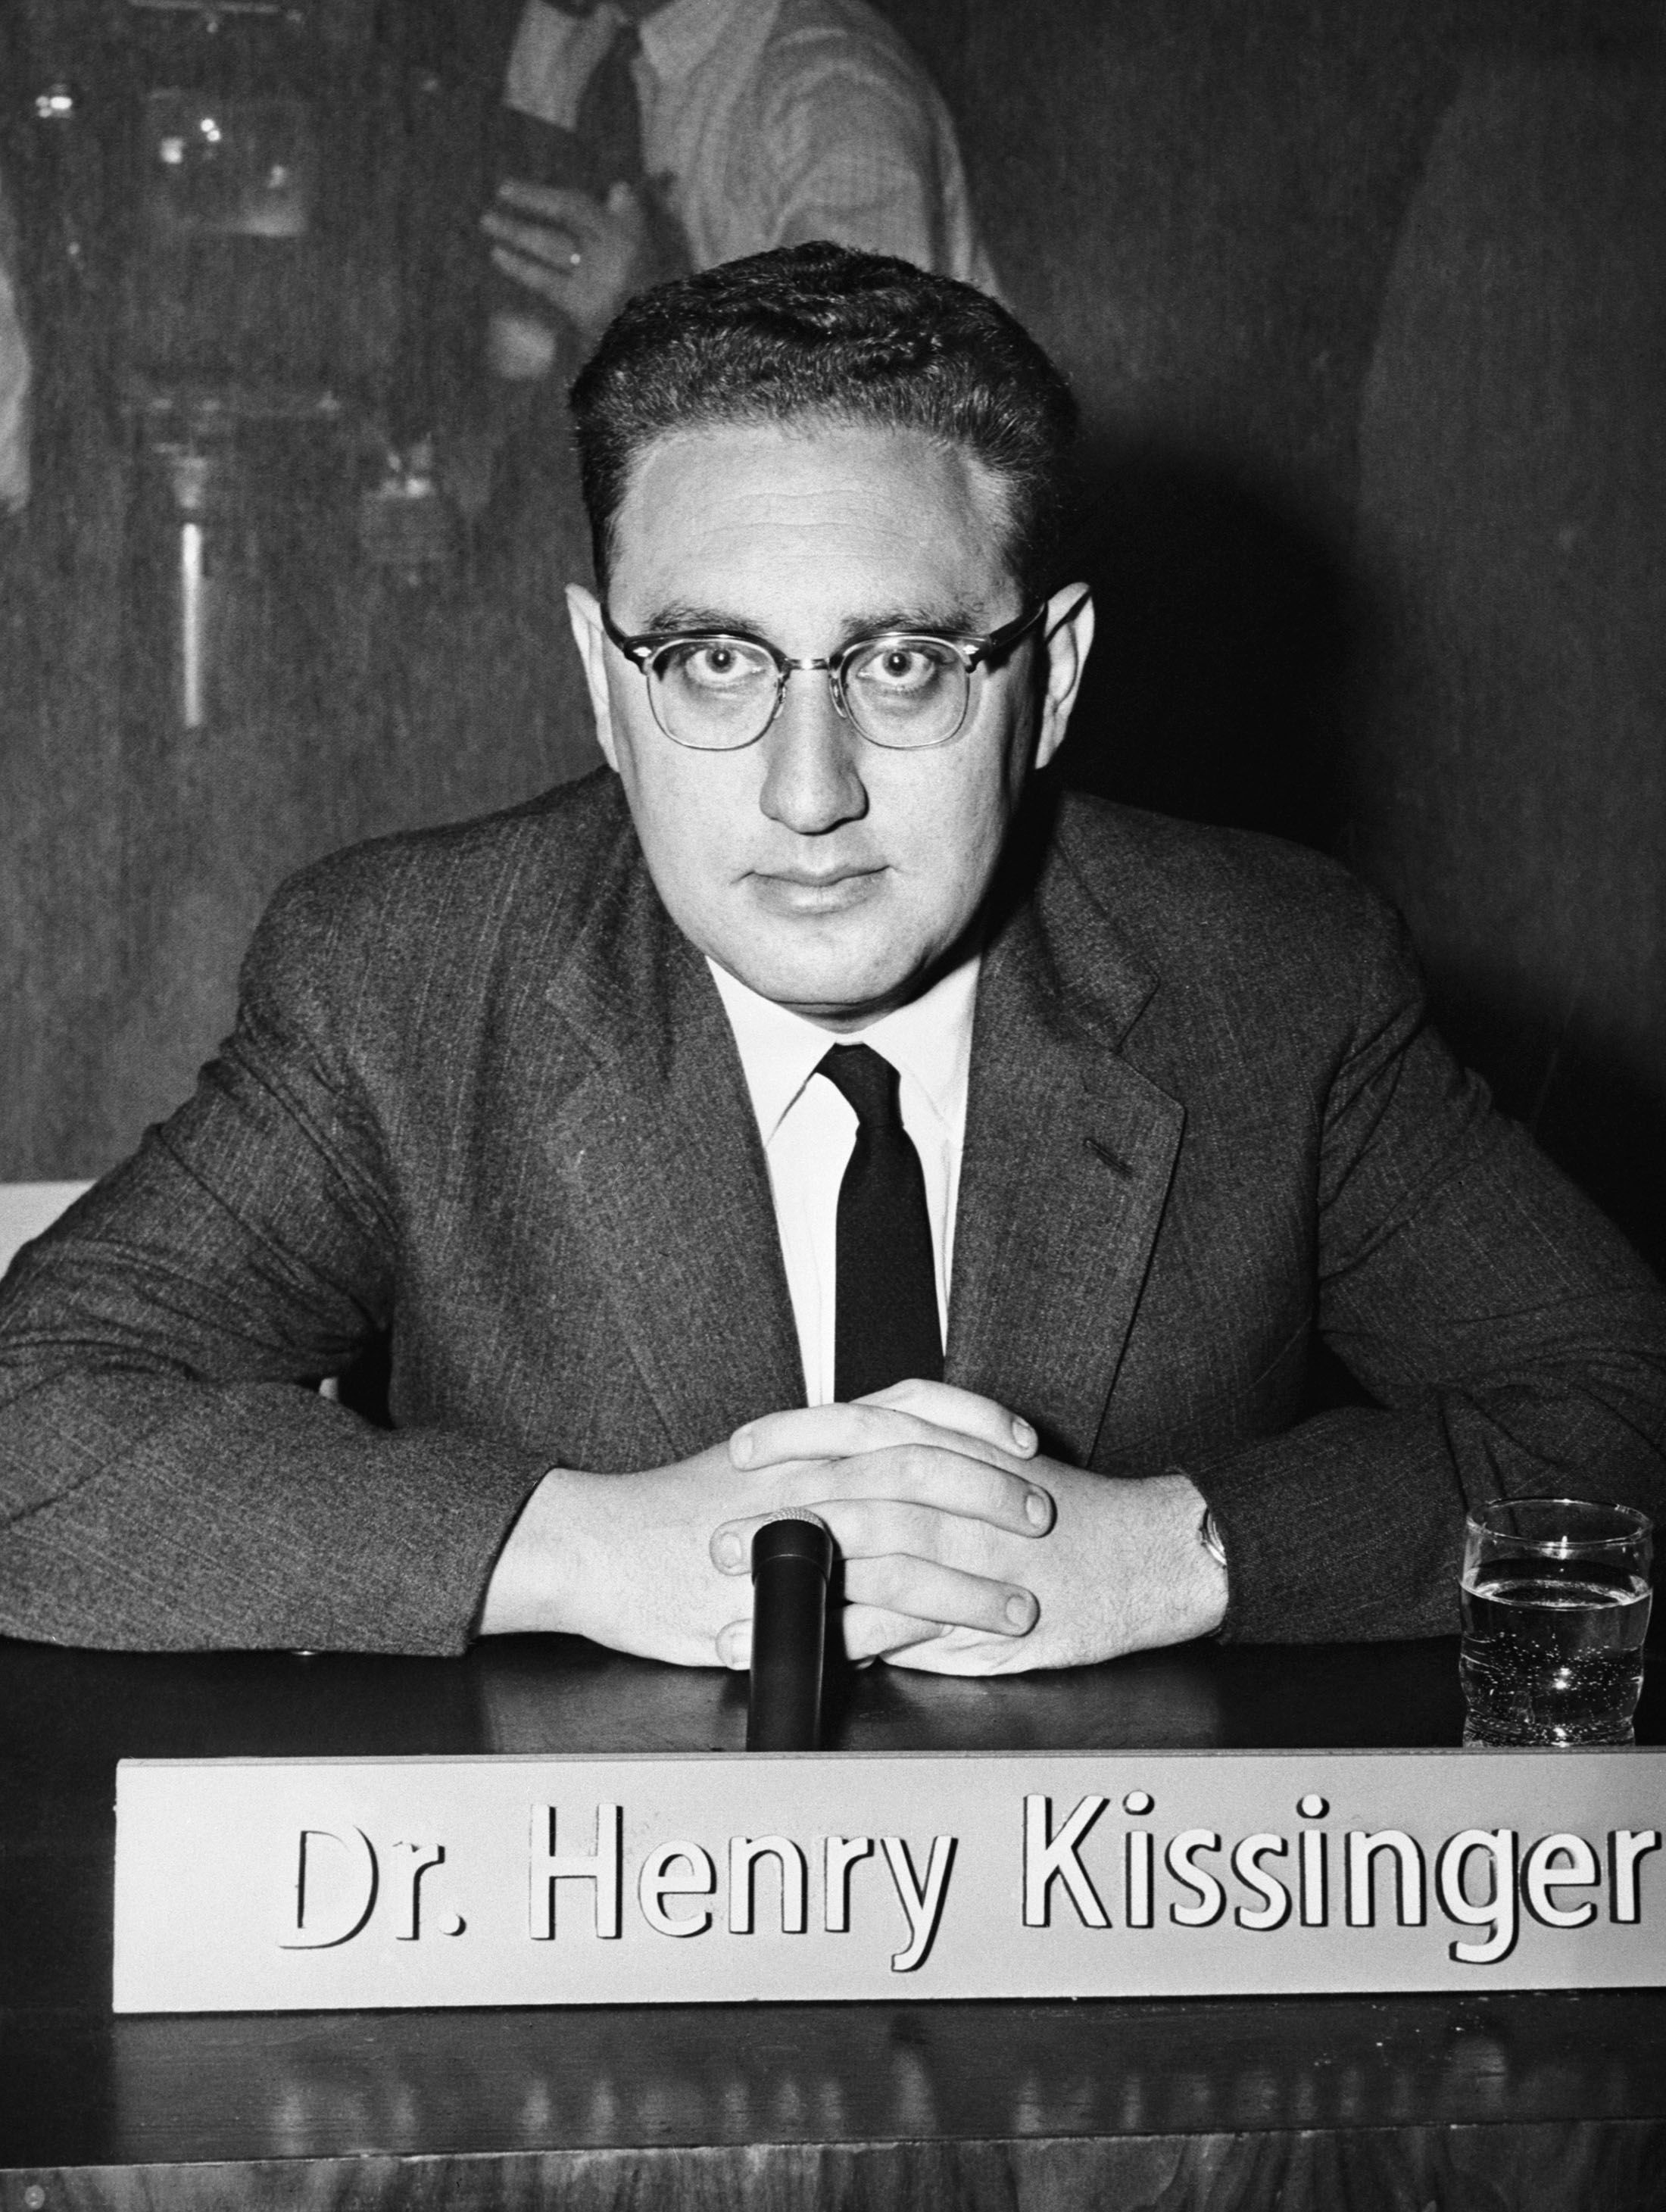 Kissinger, seen here in 1957, was a Harvard University faculty member who became associate director of Harvard's Center for International Affairs. He became a US citizen in 1943 and served in World War II.